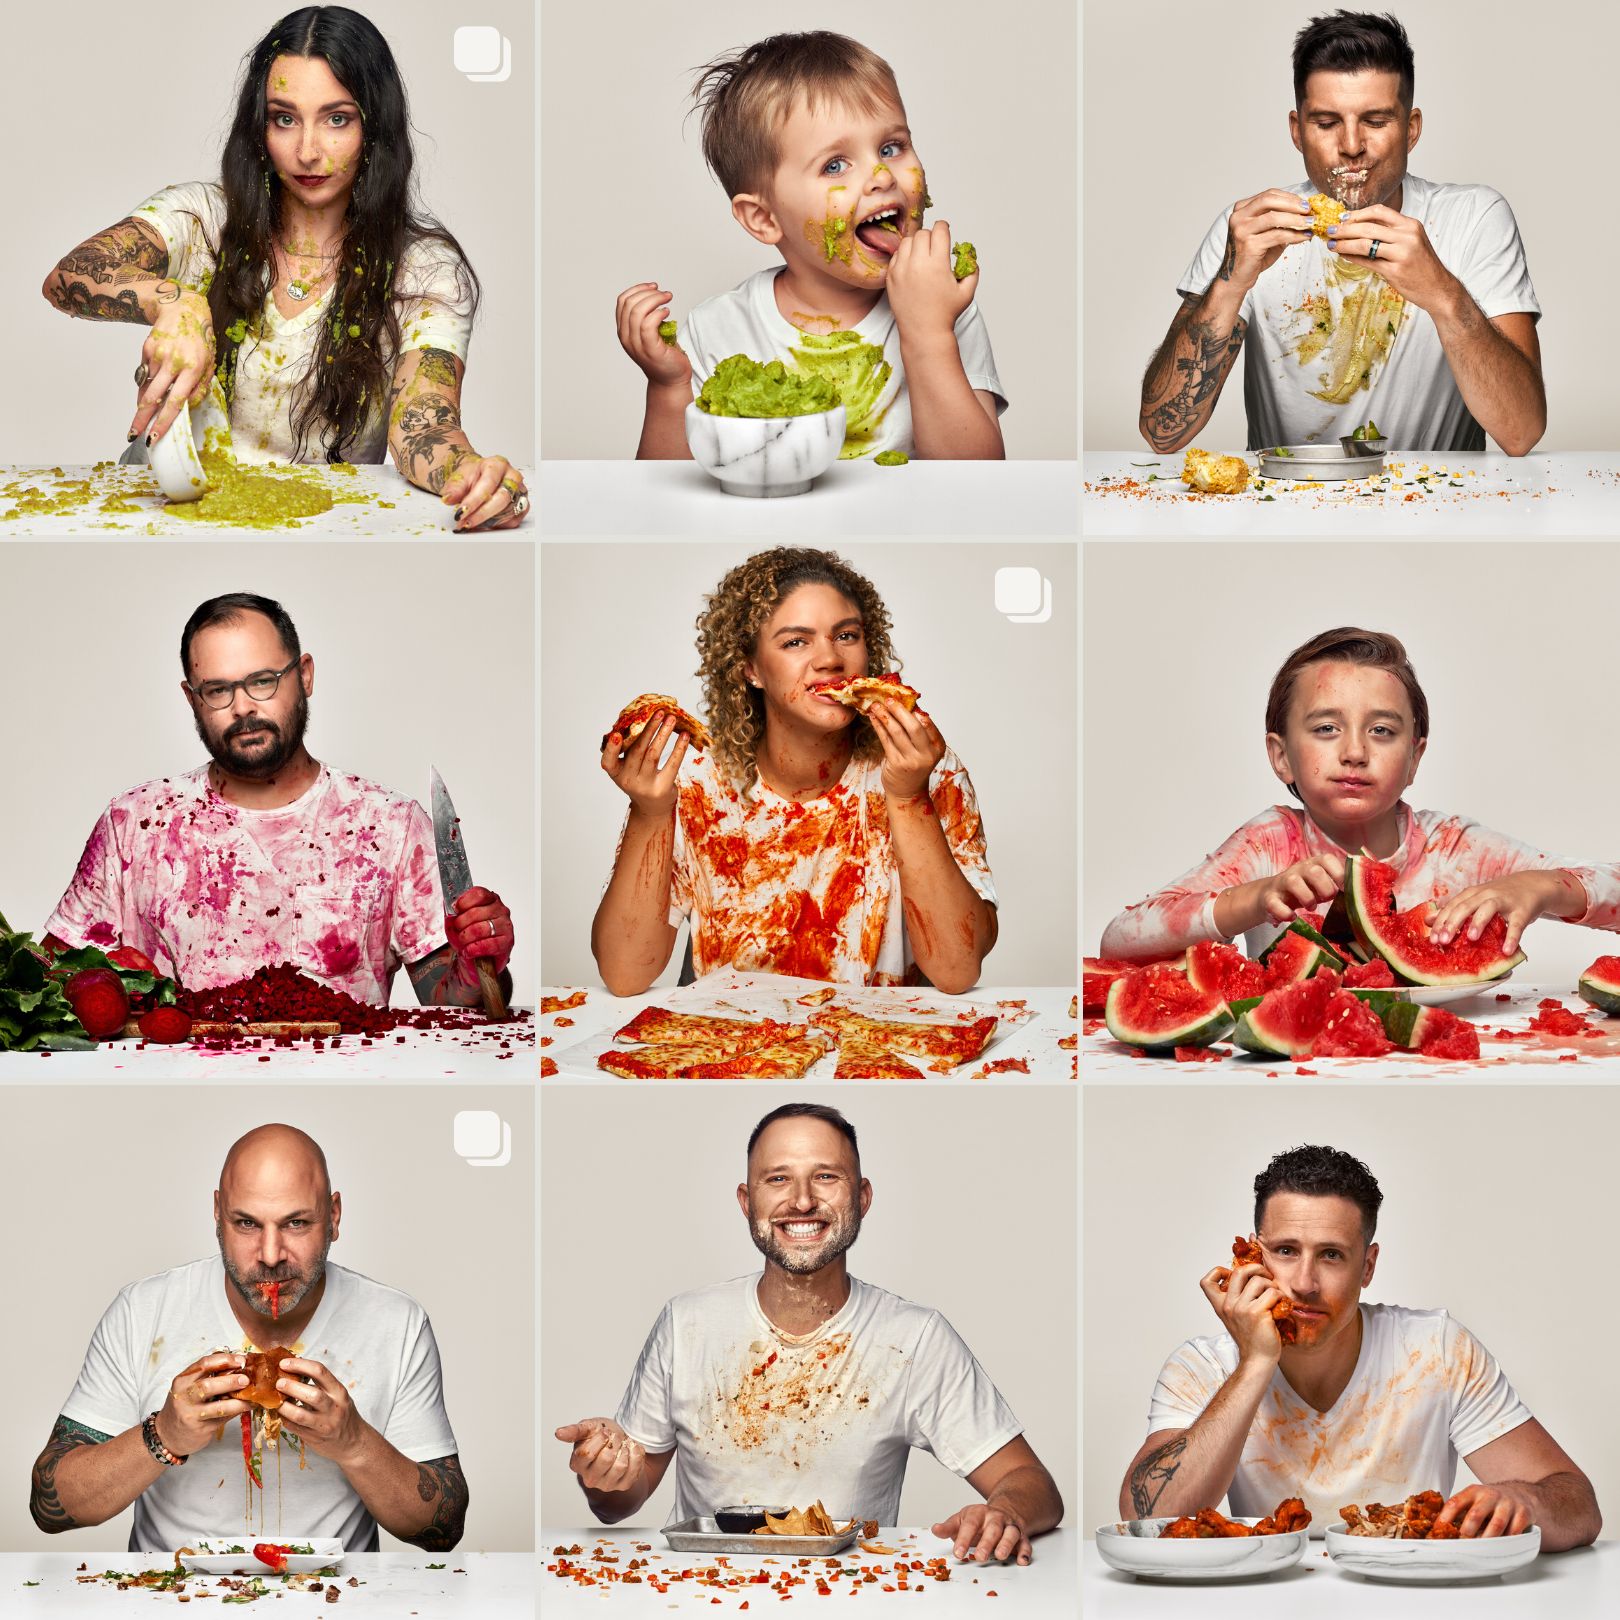 Collection of Messy Food Images by Luke Copping 